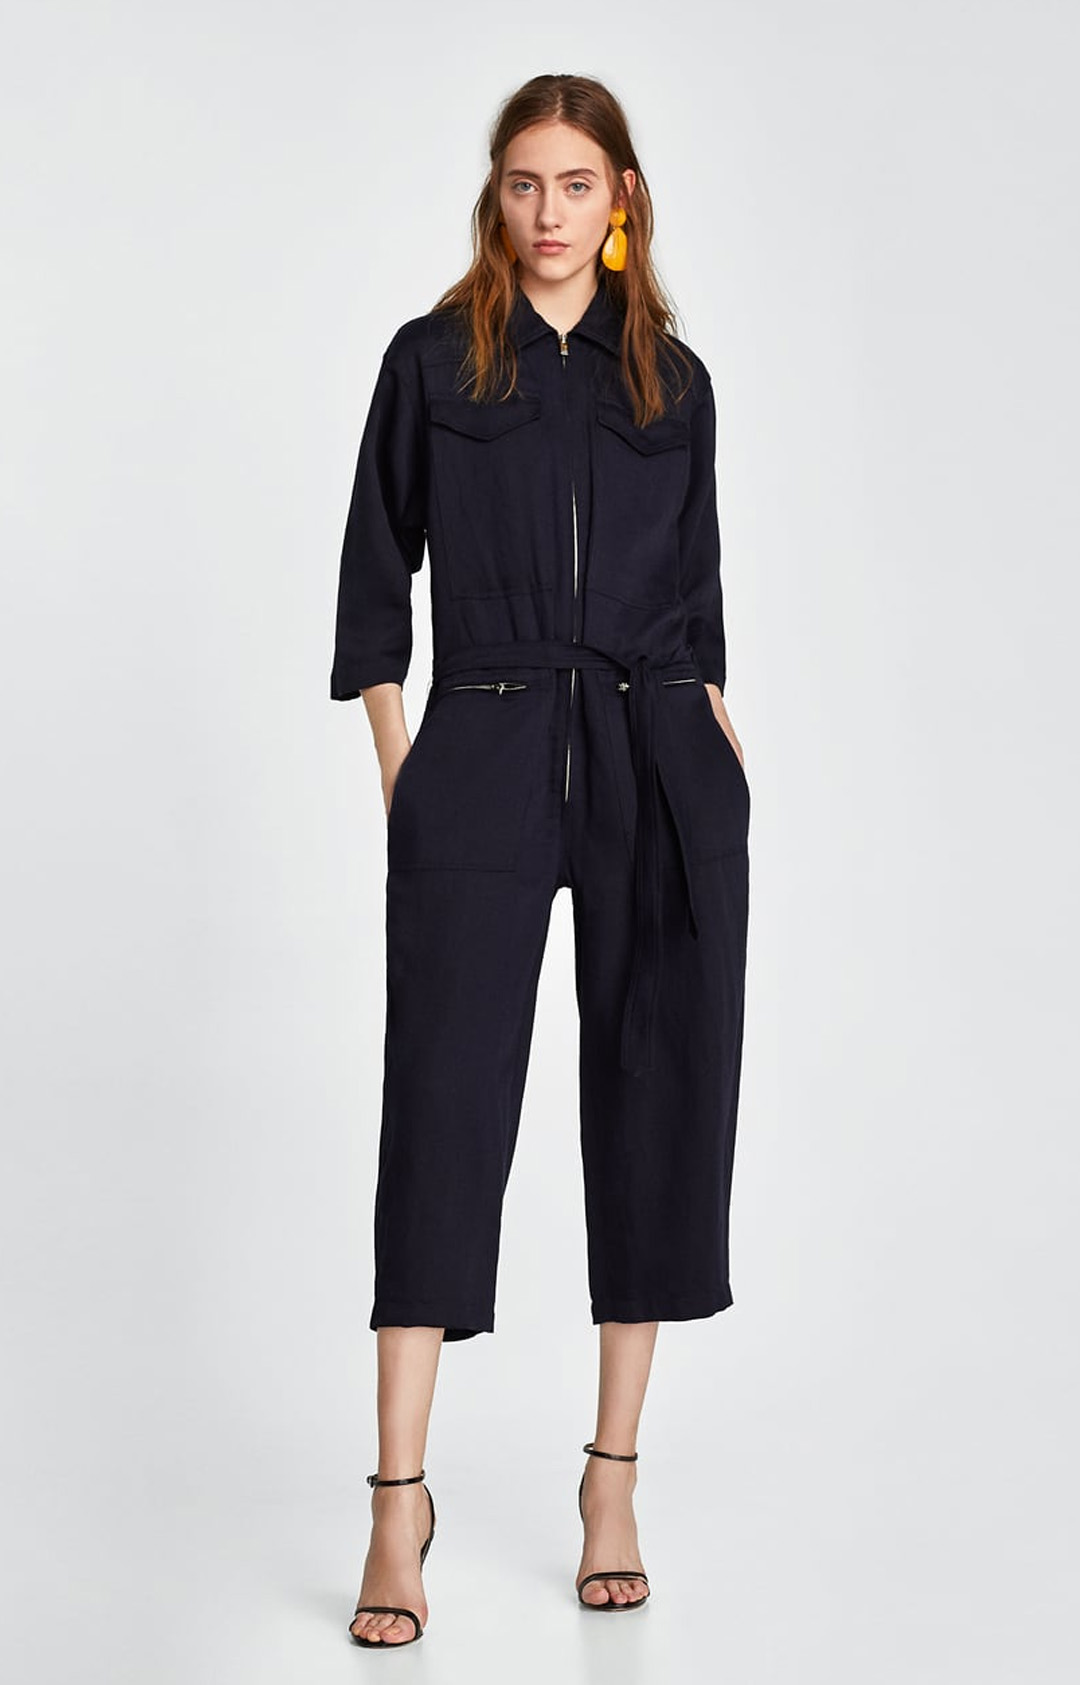 Cropped Jumpsuit, $139 from Zara